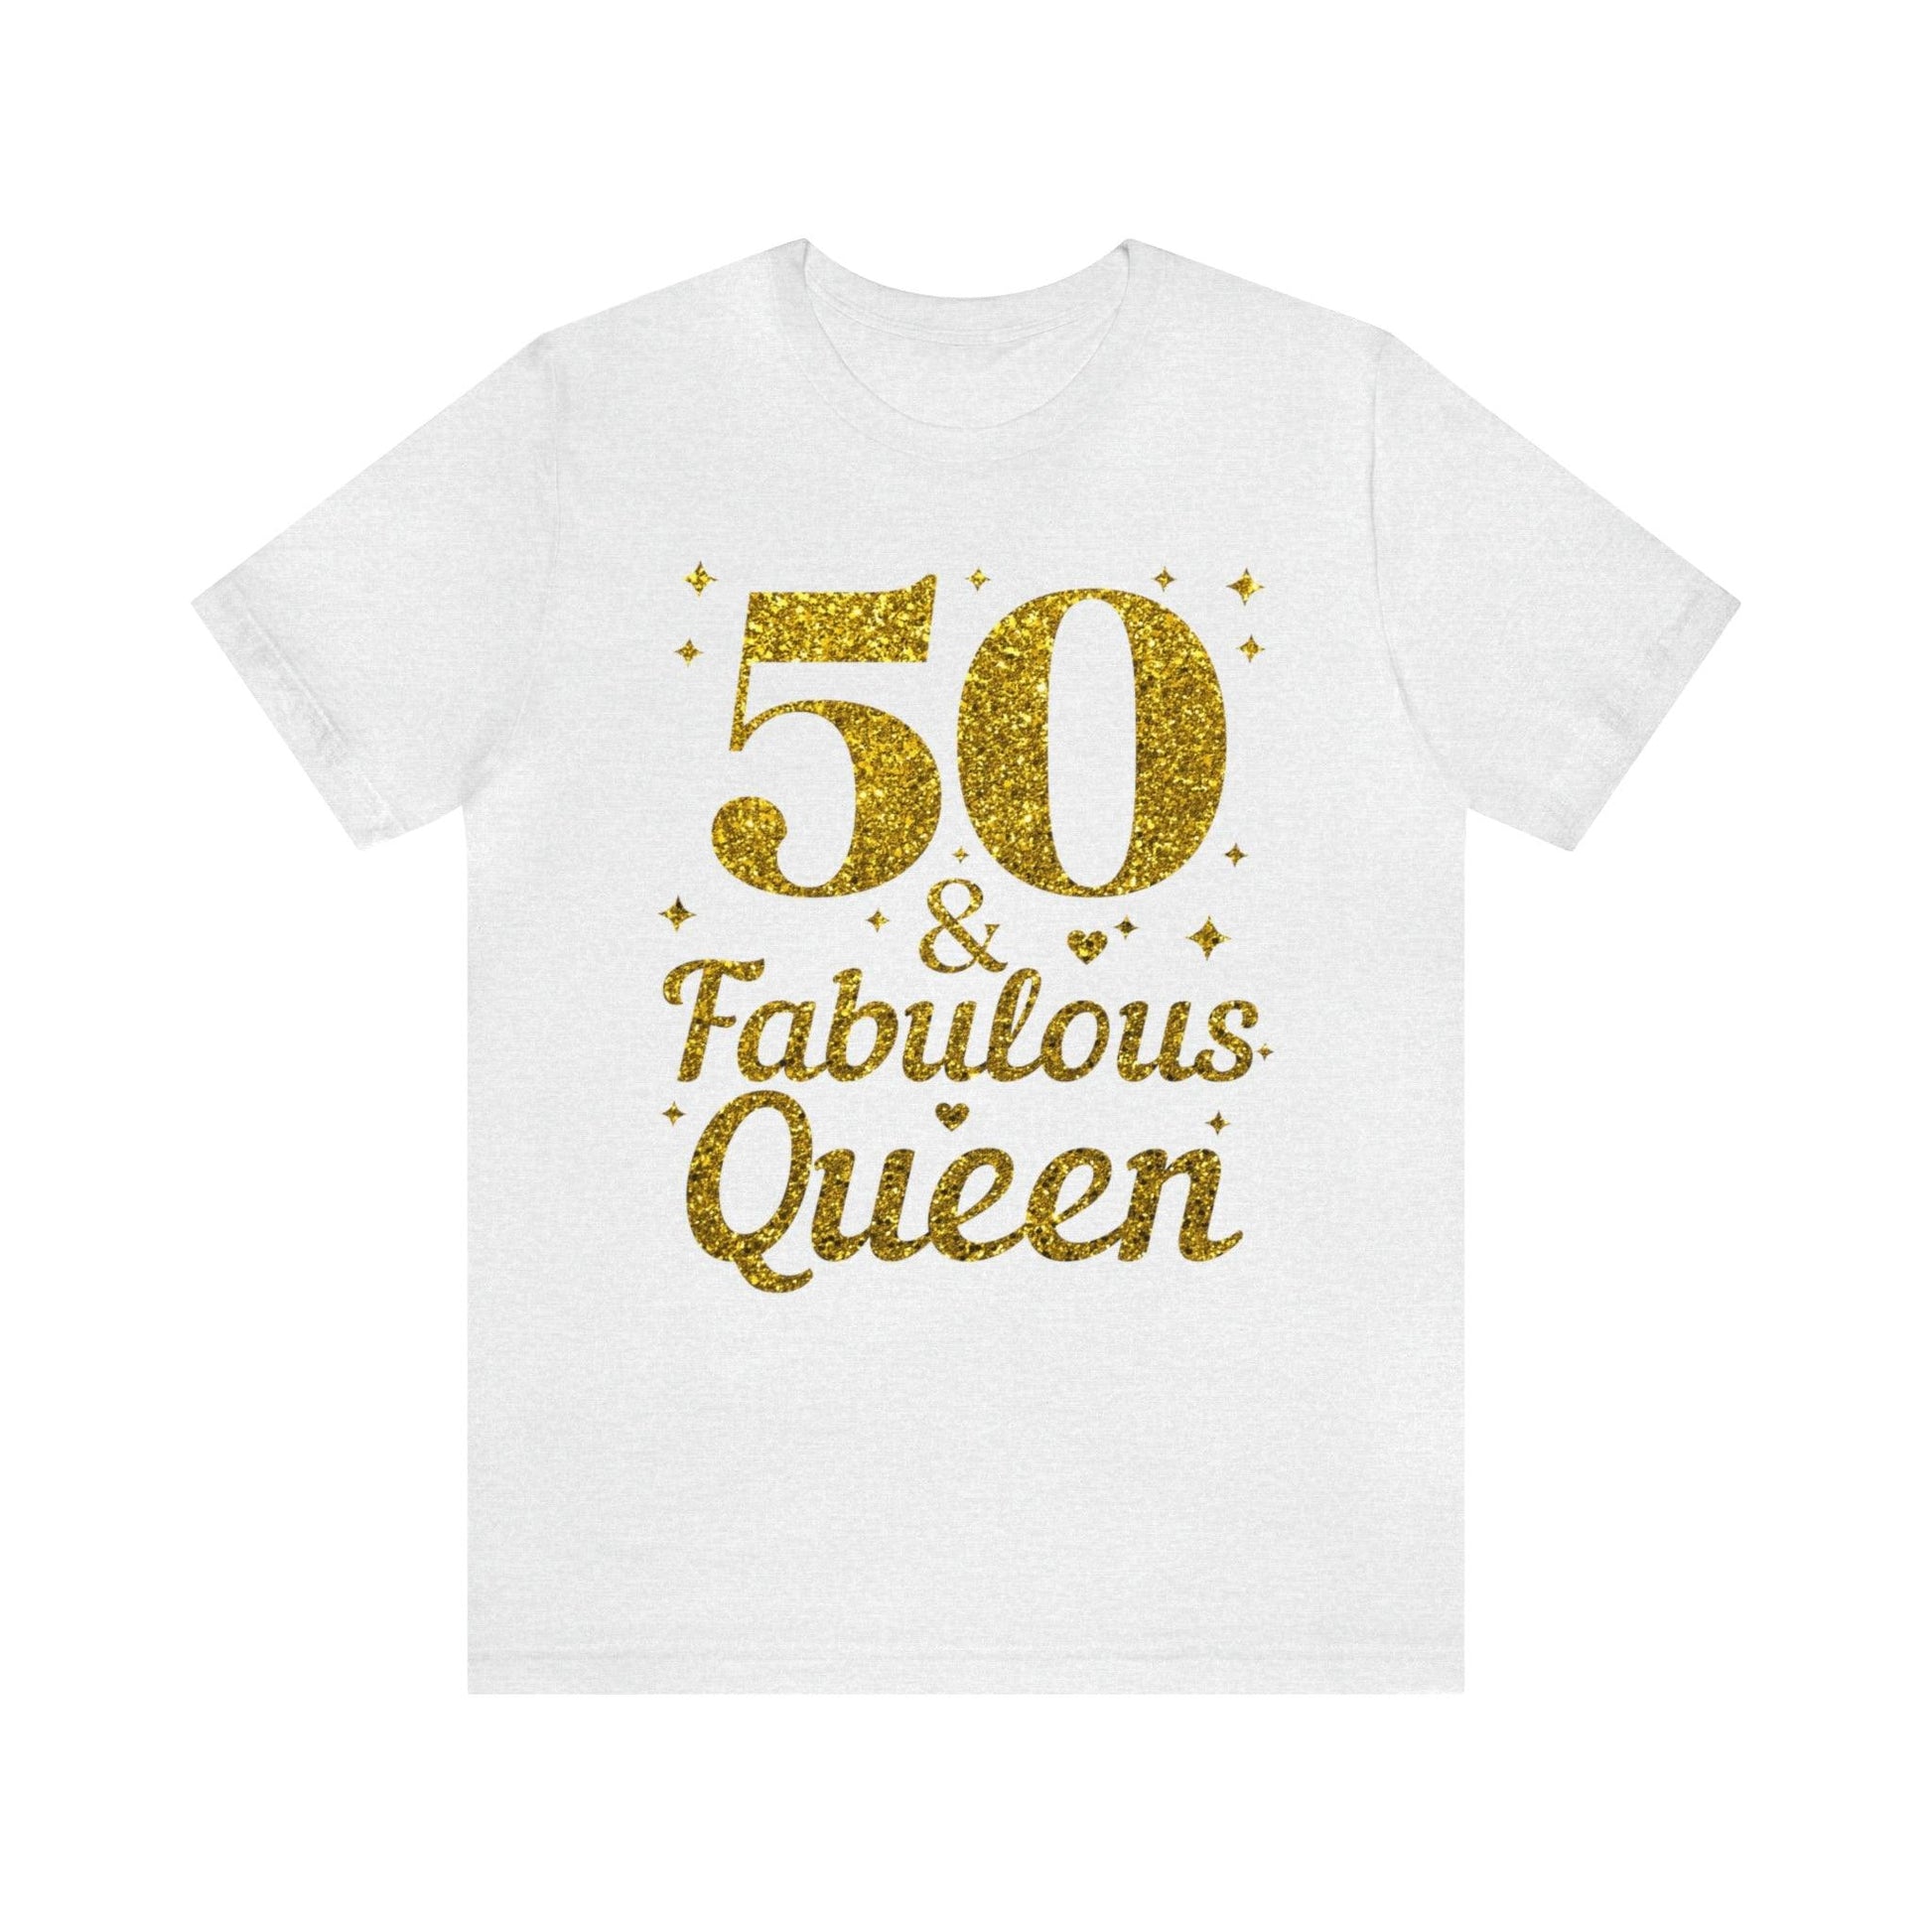 50 and Fabulous Queen shirt, Funny 50th birthday shirt, 50th birthday Tshirt, birthday queen shirt, Gift for 50th birthday, Vintage shirt, birthday gift, birthday girl shirt, mom’s birthday gift - Giftsmojo